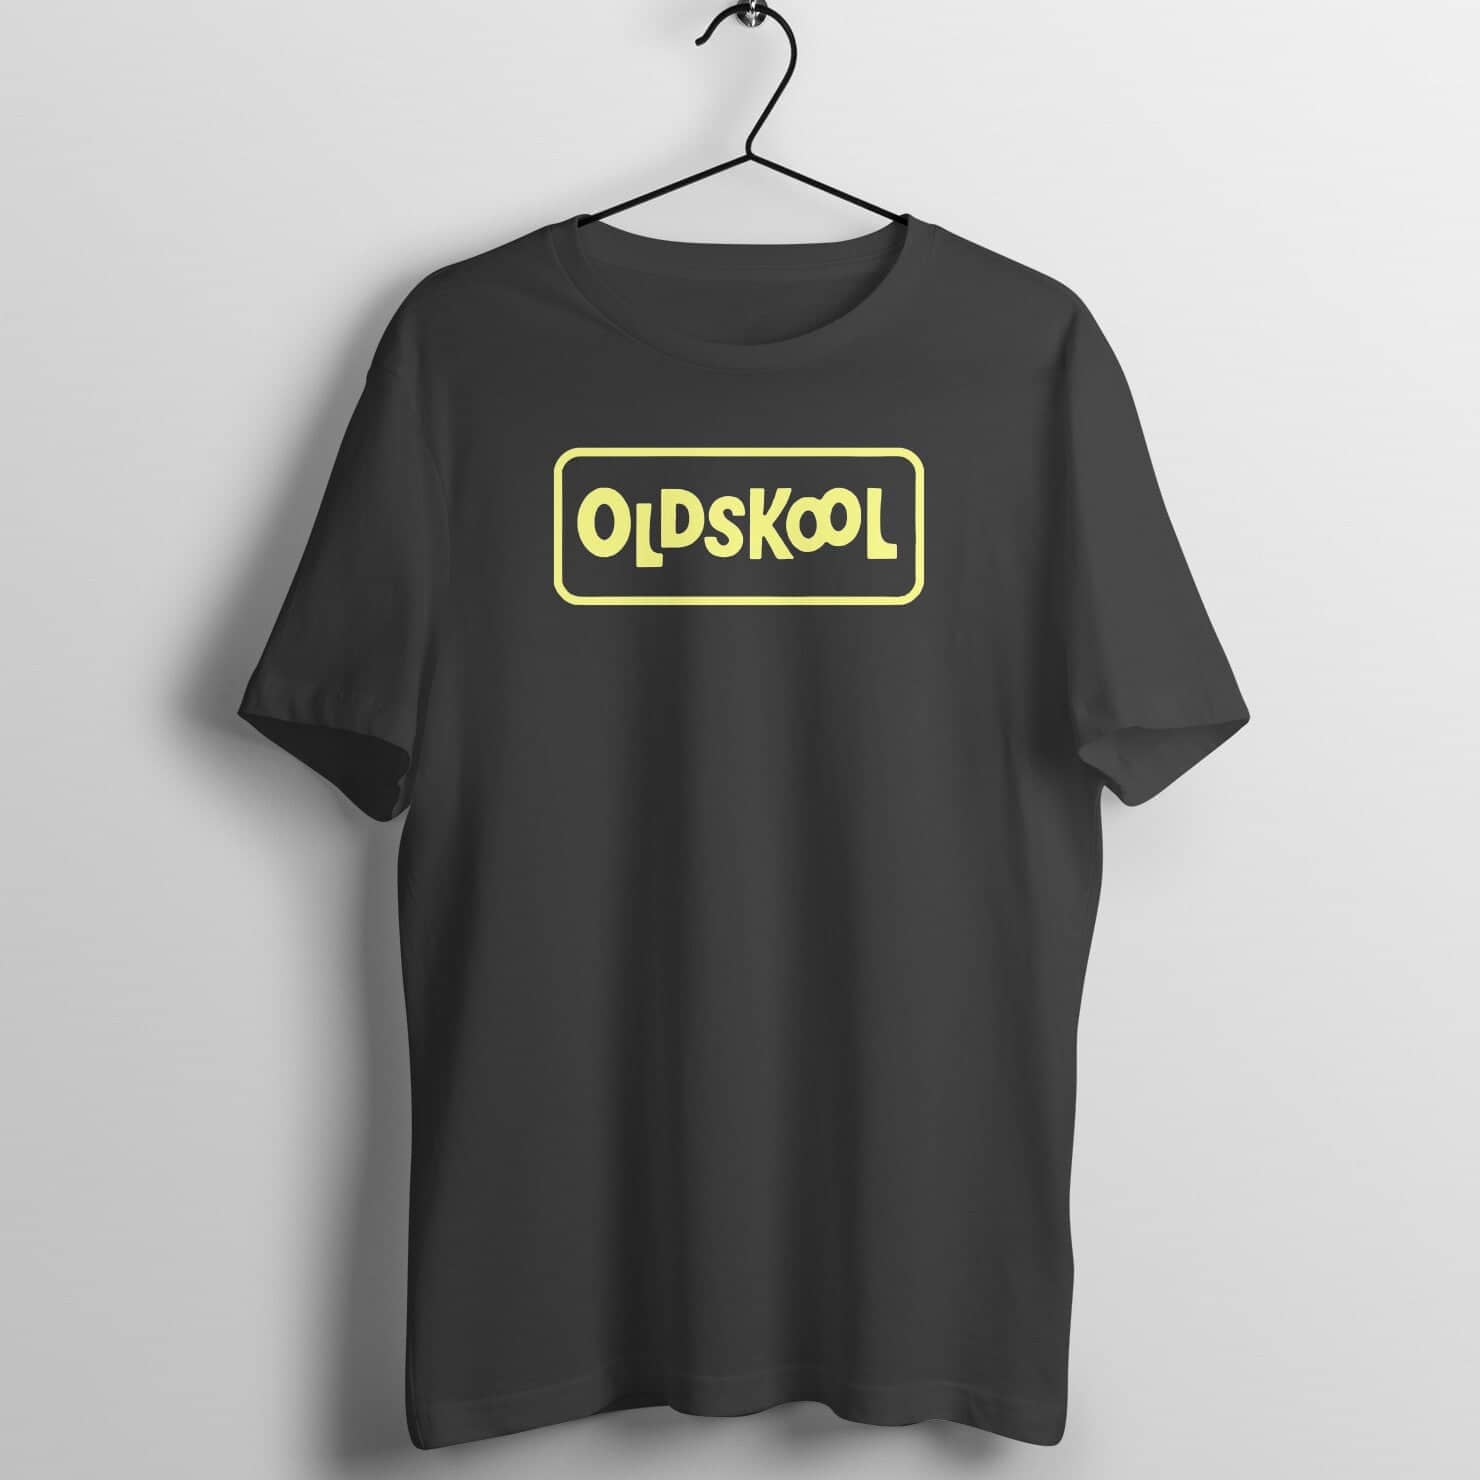 Old Skool Exclusive Black T Shirt for Men and Women Shirts & Tops Printrove 